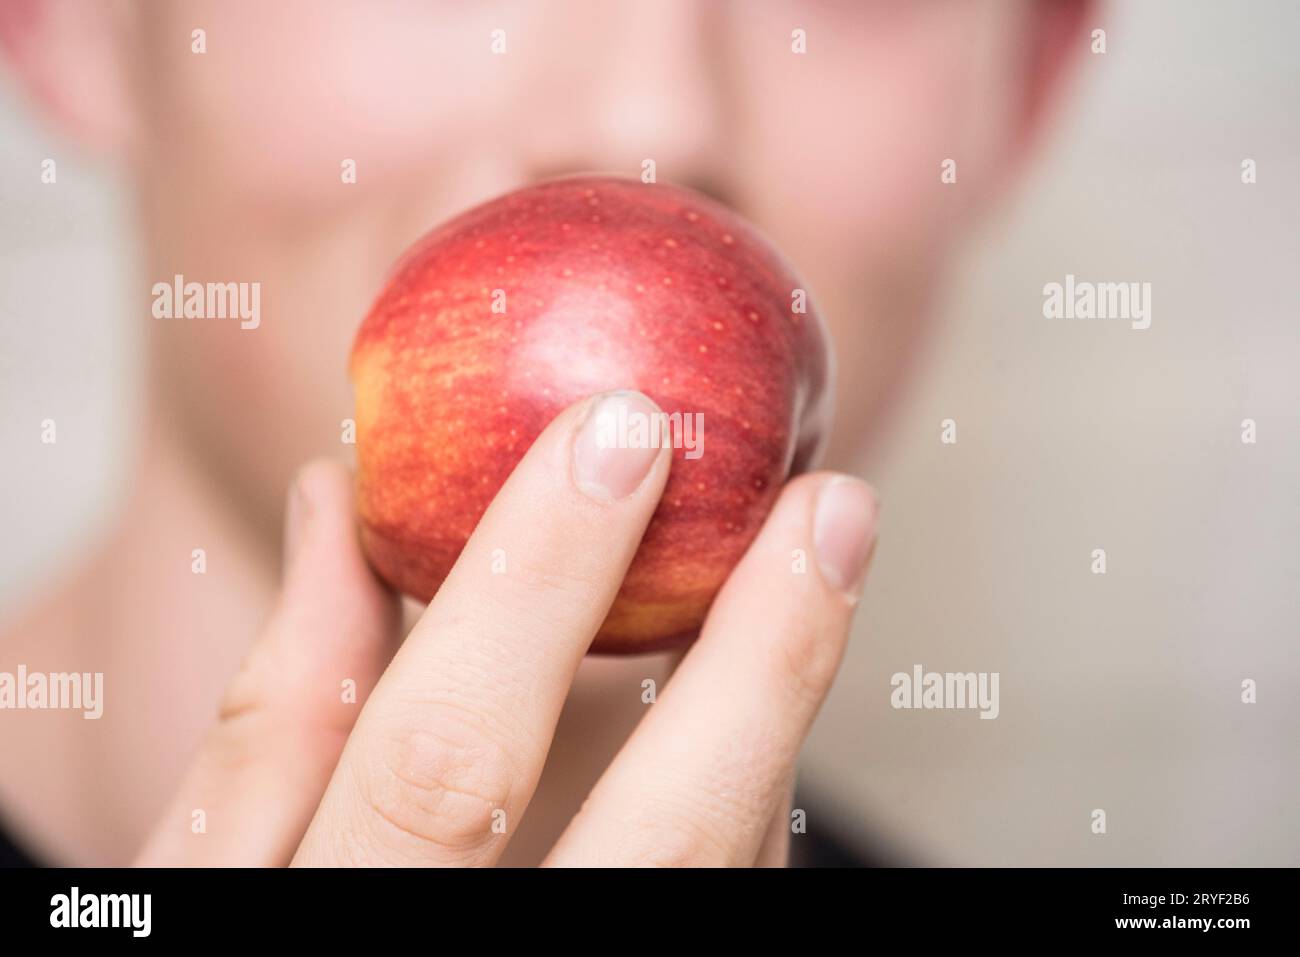 Consumer with apple in hand Stock Photo